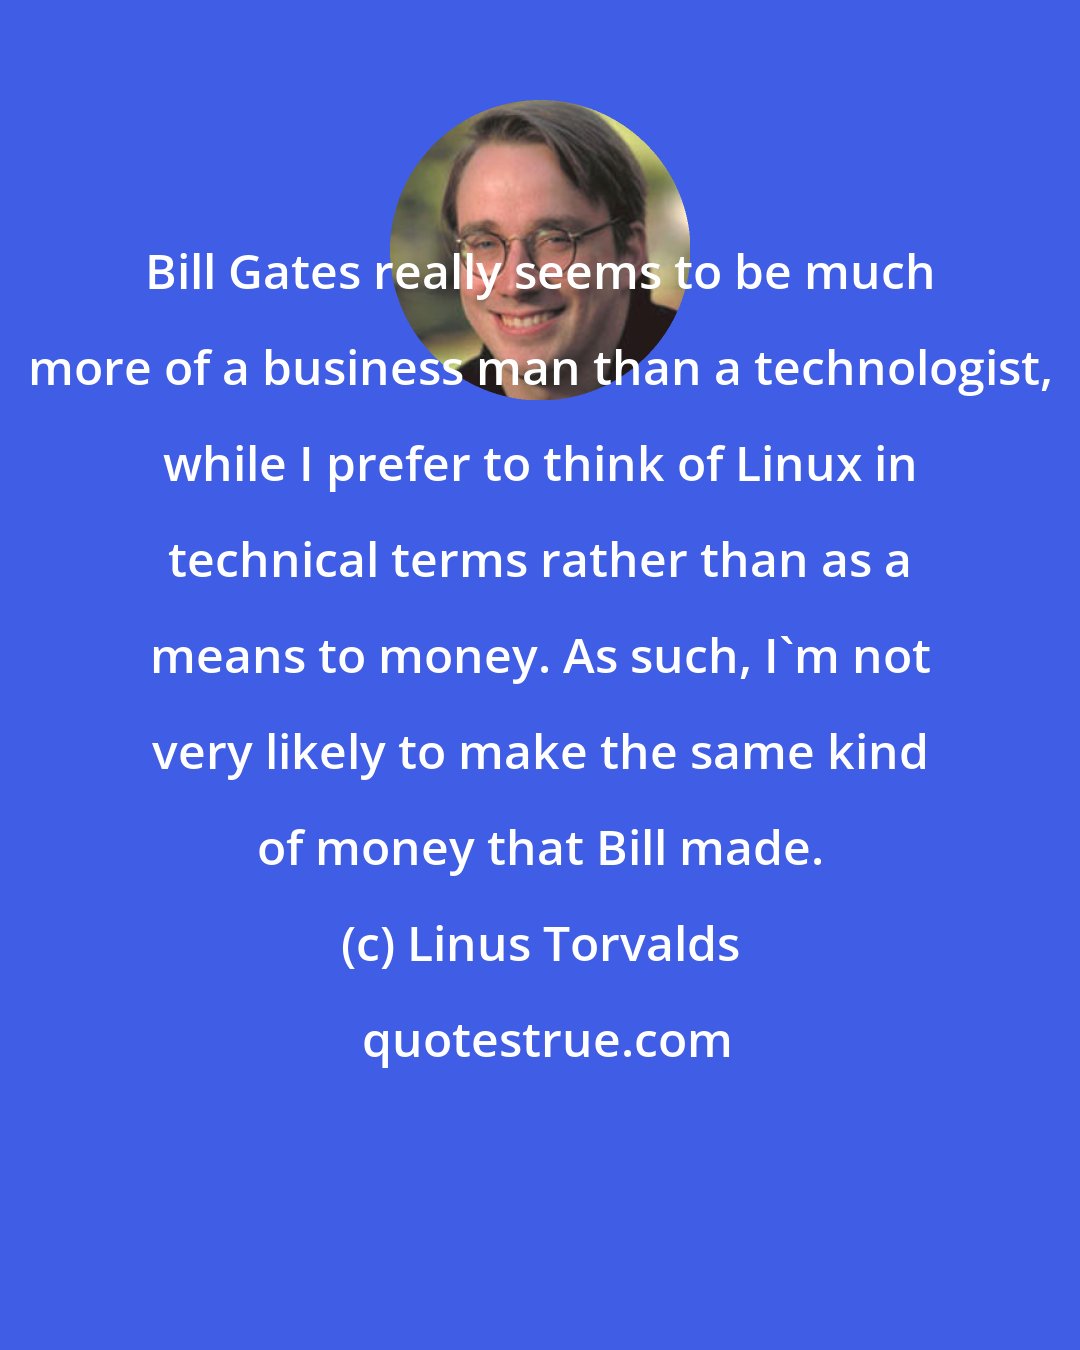 Linus Torvalds: Bill Gates really seems to be much more of a business man than a technologist, while I prefer to think of Linux in technical terms rather than as a means to money. As such, I'm not very likely to make the same kind of money that Bill made.